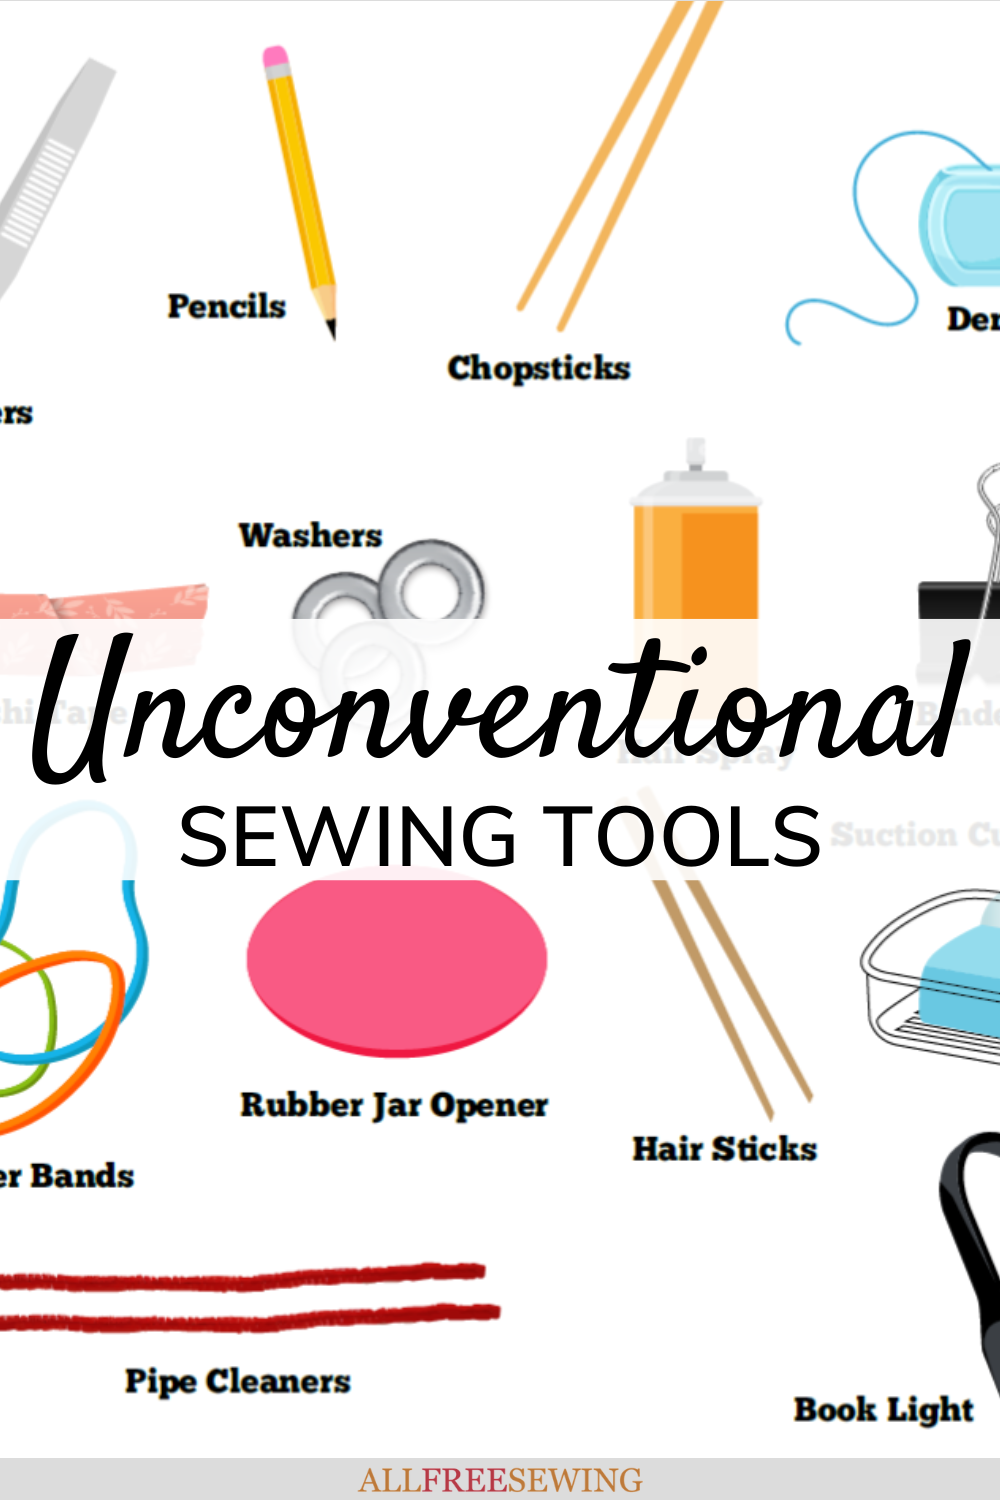 11 Nonconventional Sewing Tools - The Sewing Loft